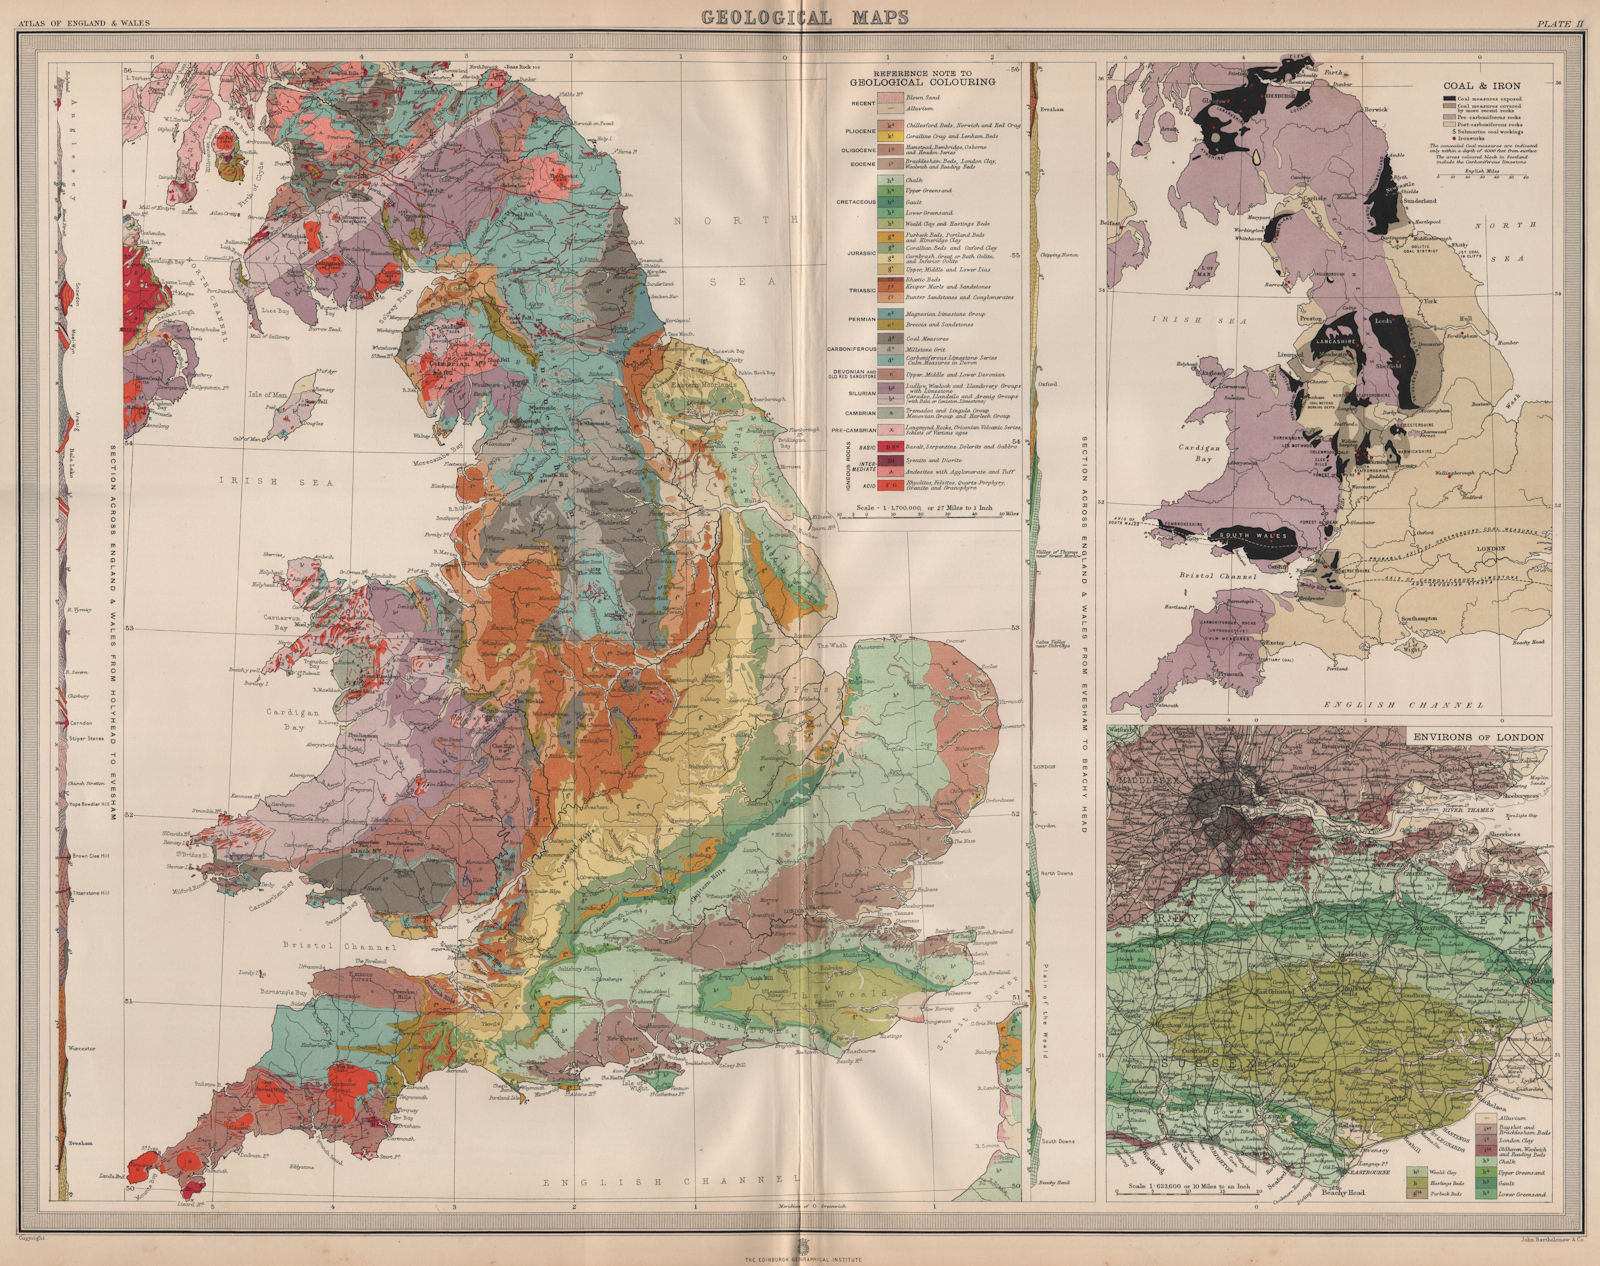 ENGLAND AND WALES. Geology. Coal & iron deposits. Geological. LARGE 1903 map